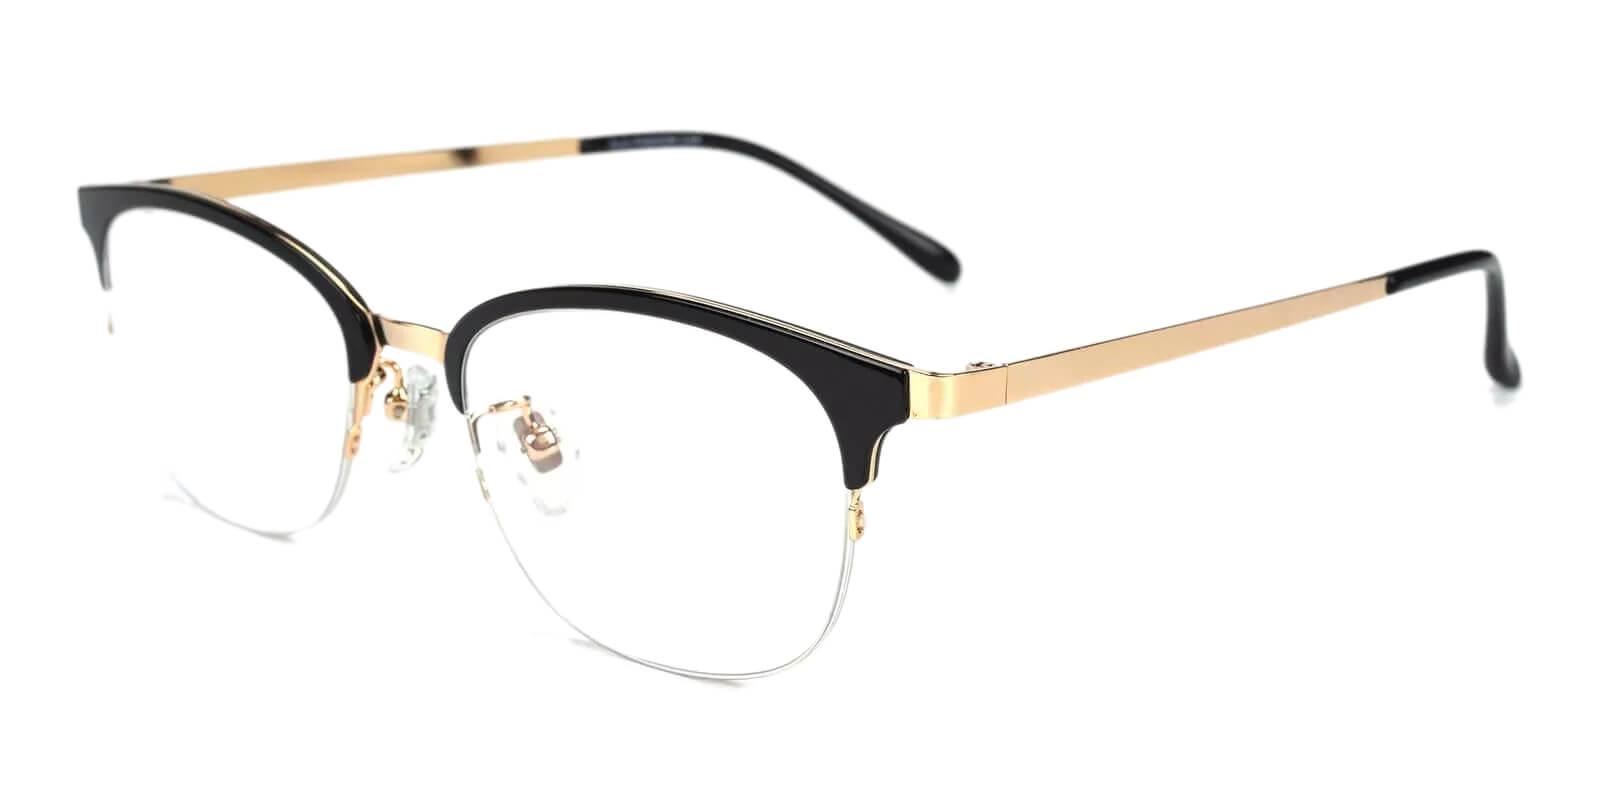 Polly Black Combination Eyeglasses , Fashion , NosePads Frames from ABBE Glasses